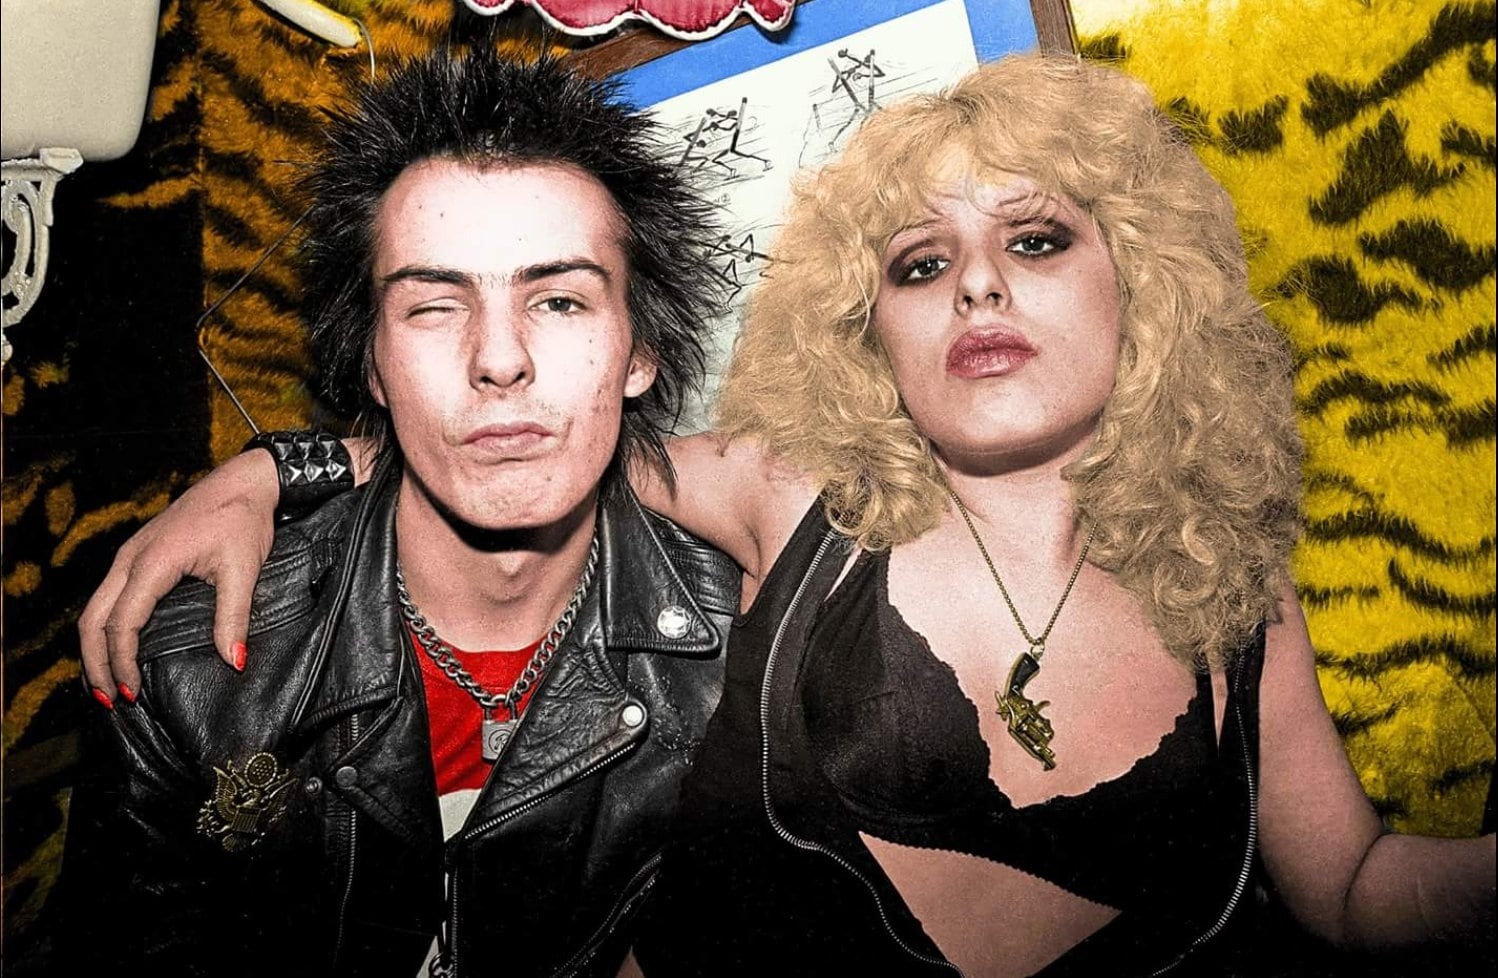 that the extreme lifelong behavioral problems of Nancy Spungen (gf of Sid Vicious from the Sex Pistols) are thought to be caused by brain damage via birth asphyxia from umbilical cord wrapped around her neck